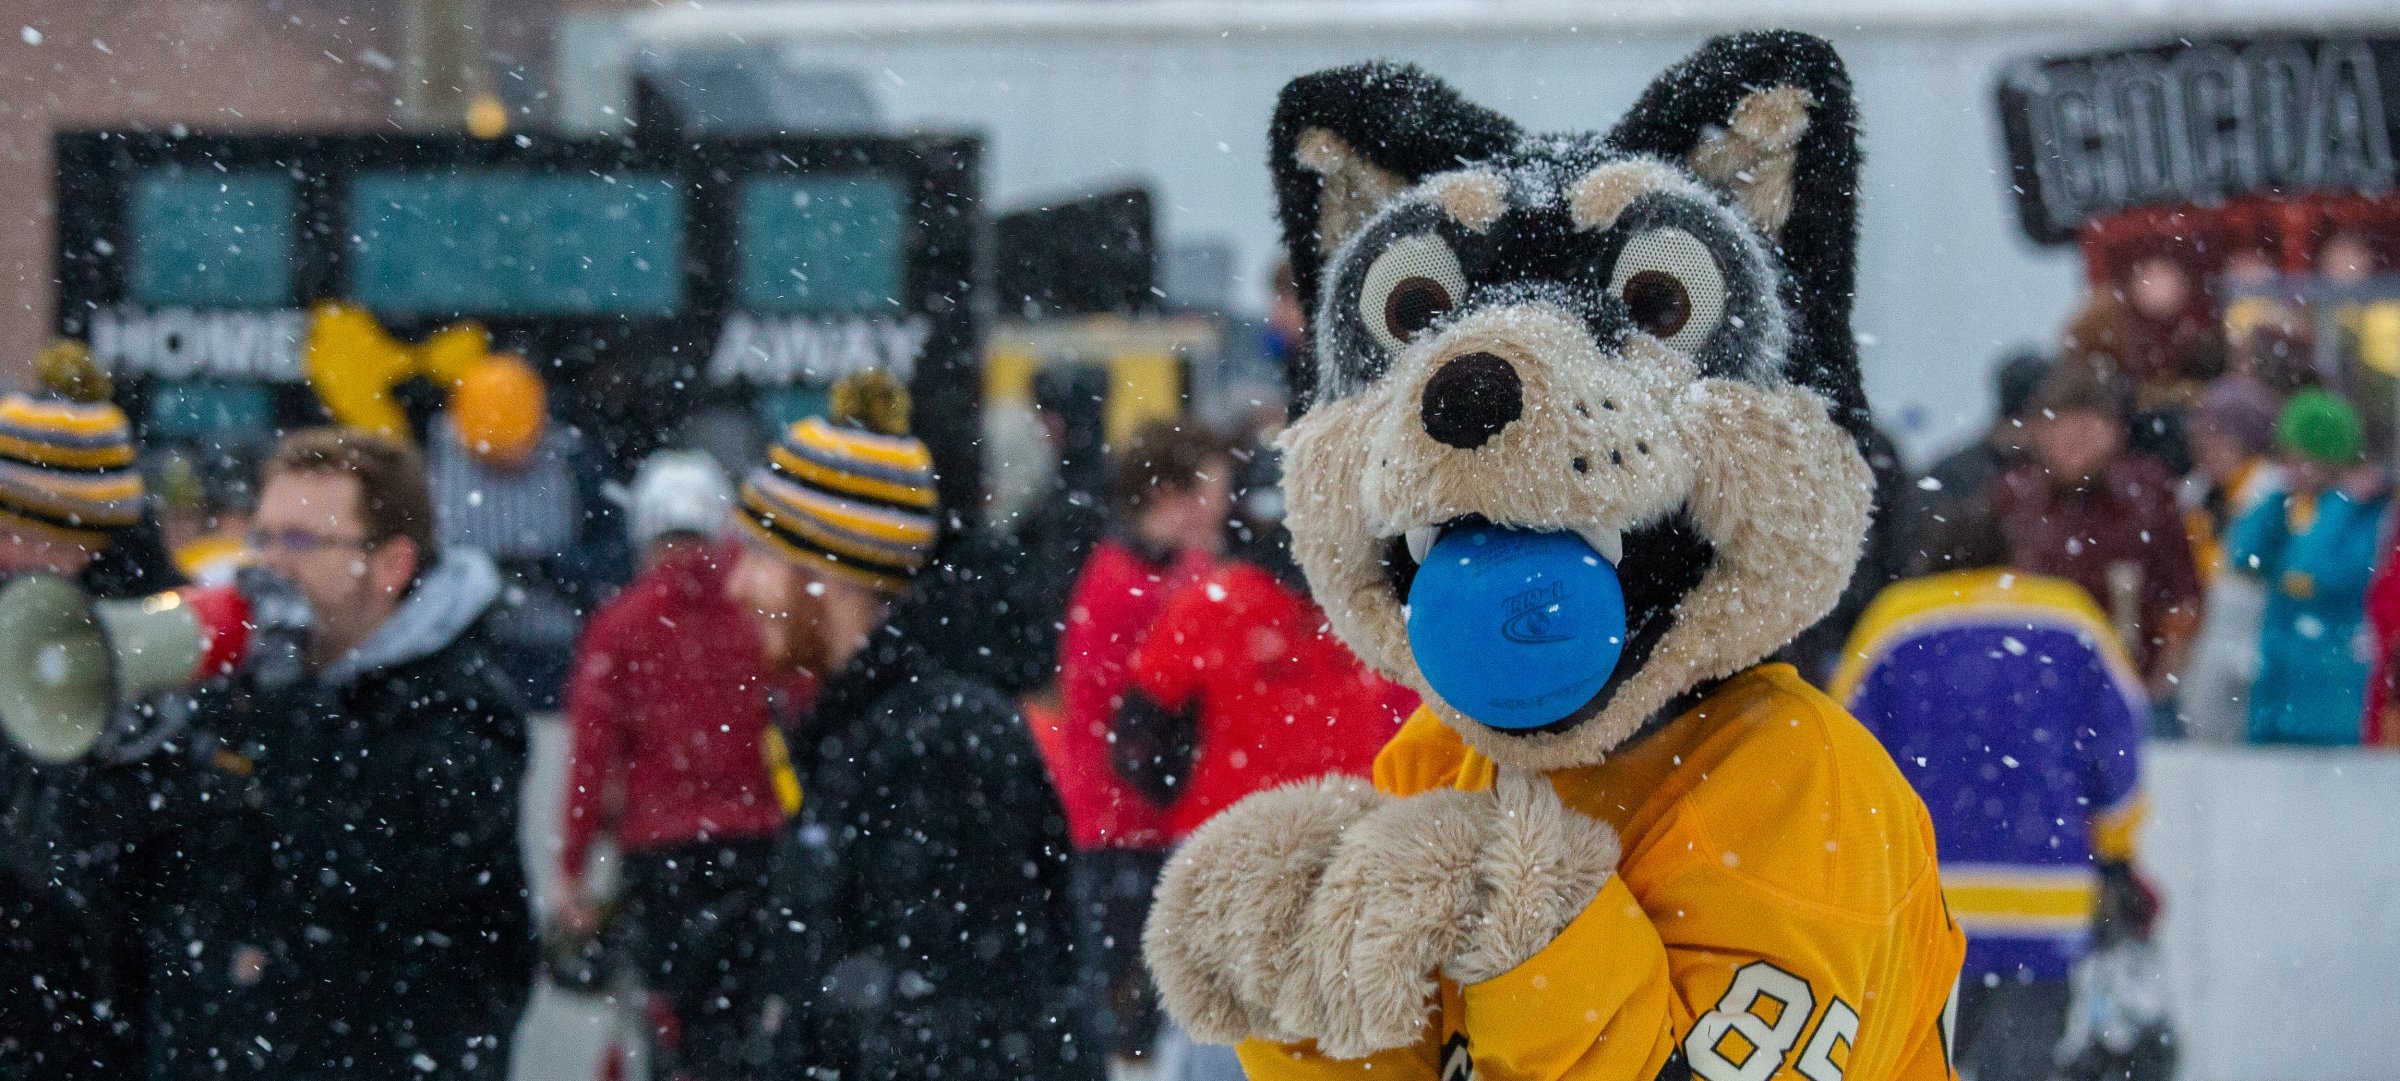 Blizzard holding a broomball ball in the mouth during winter carnival